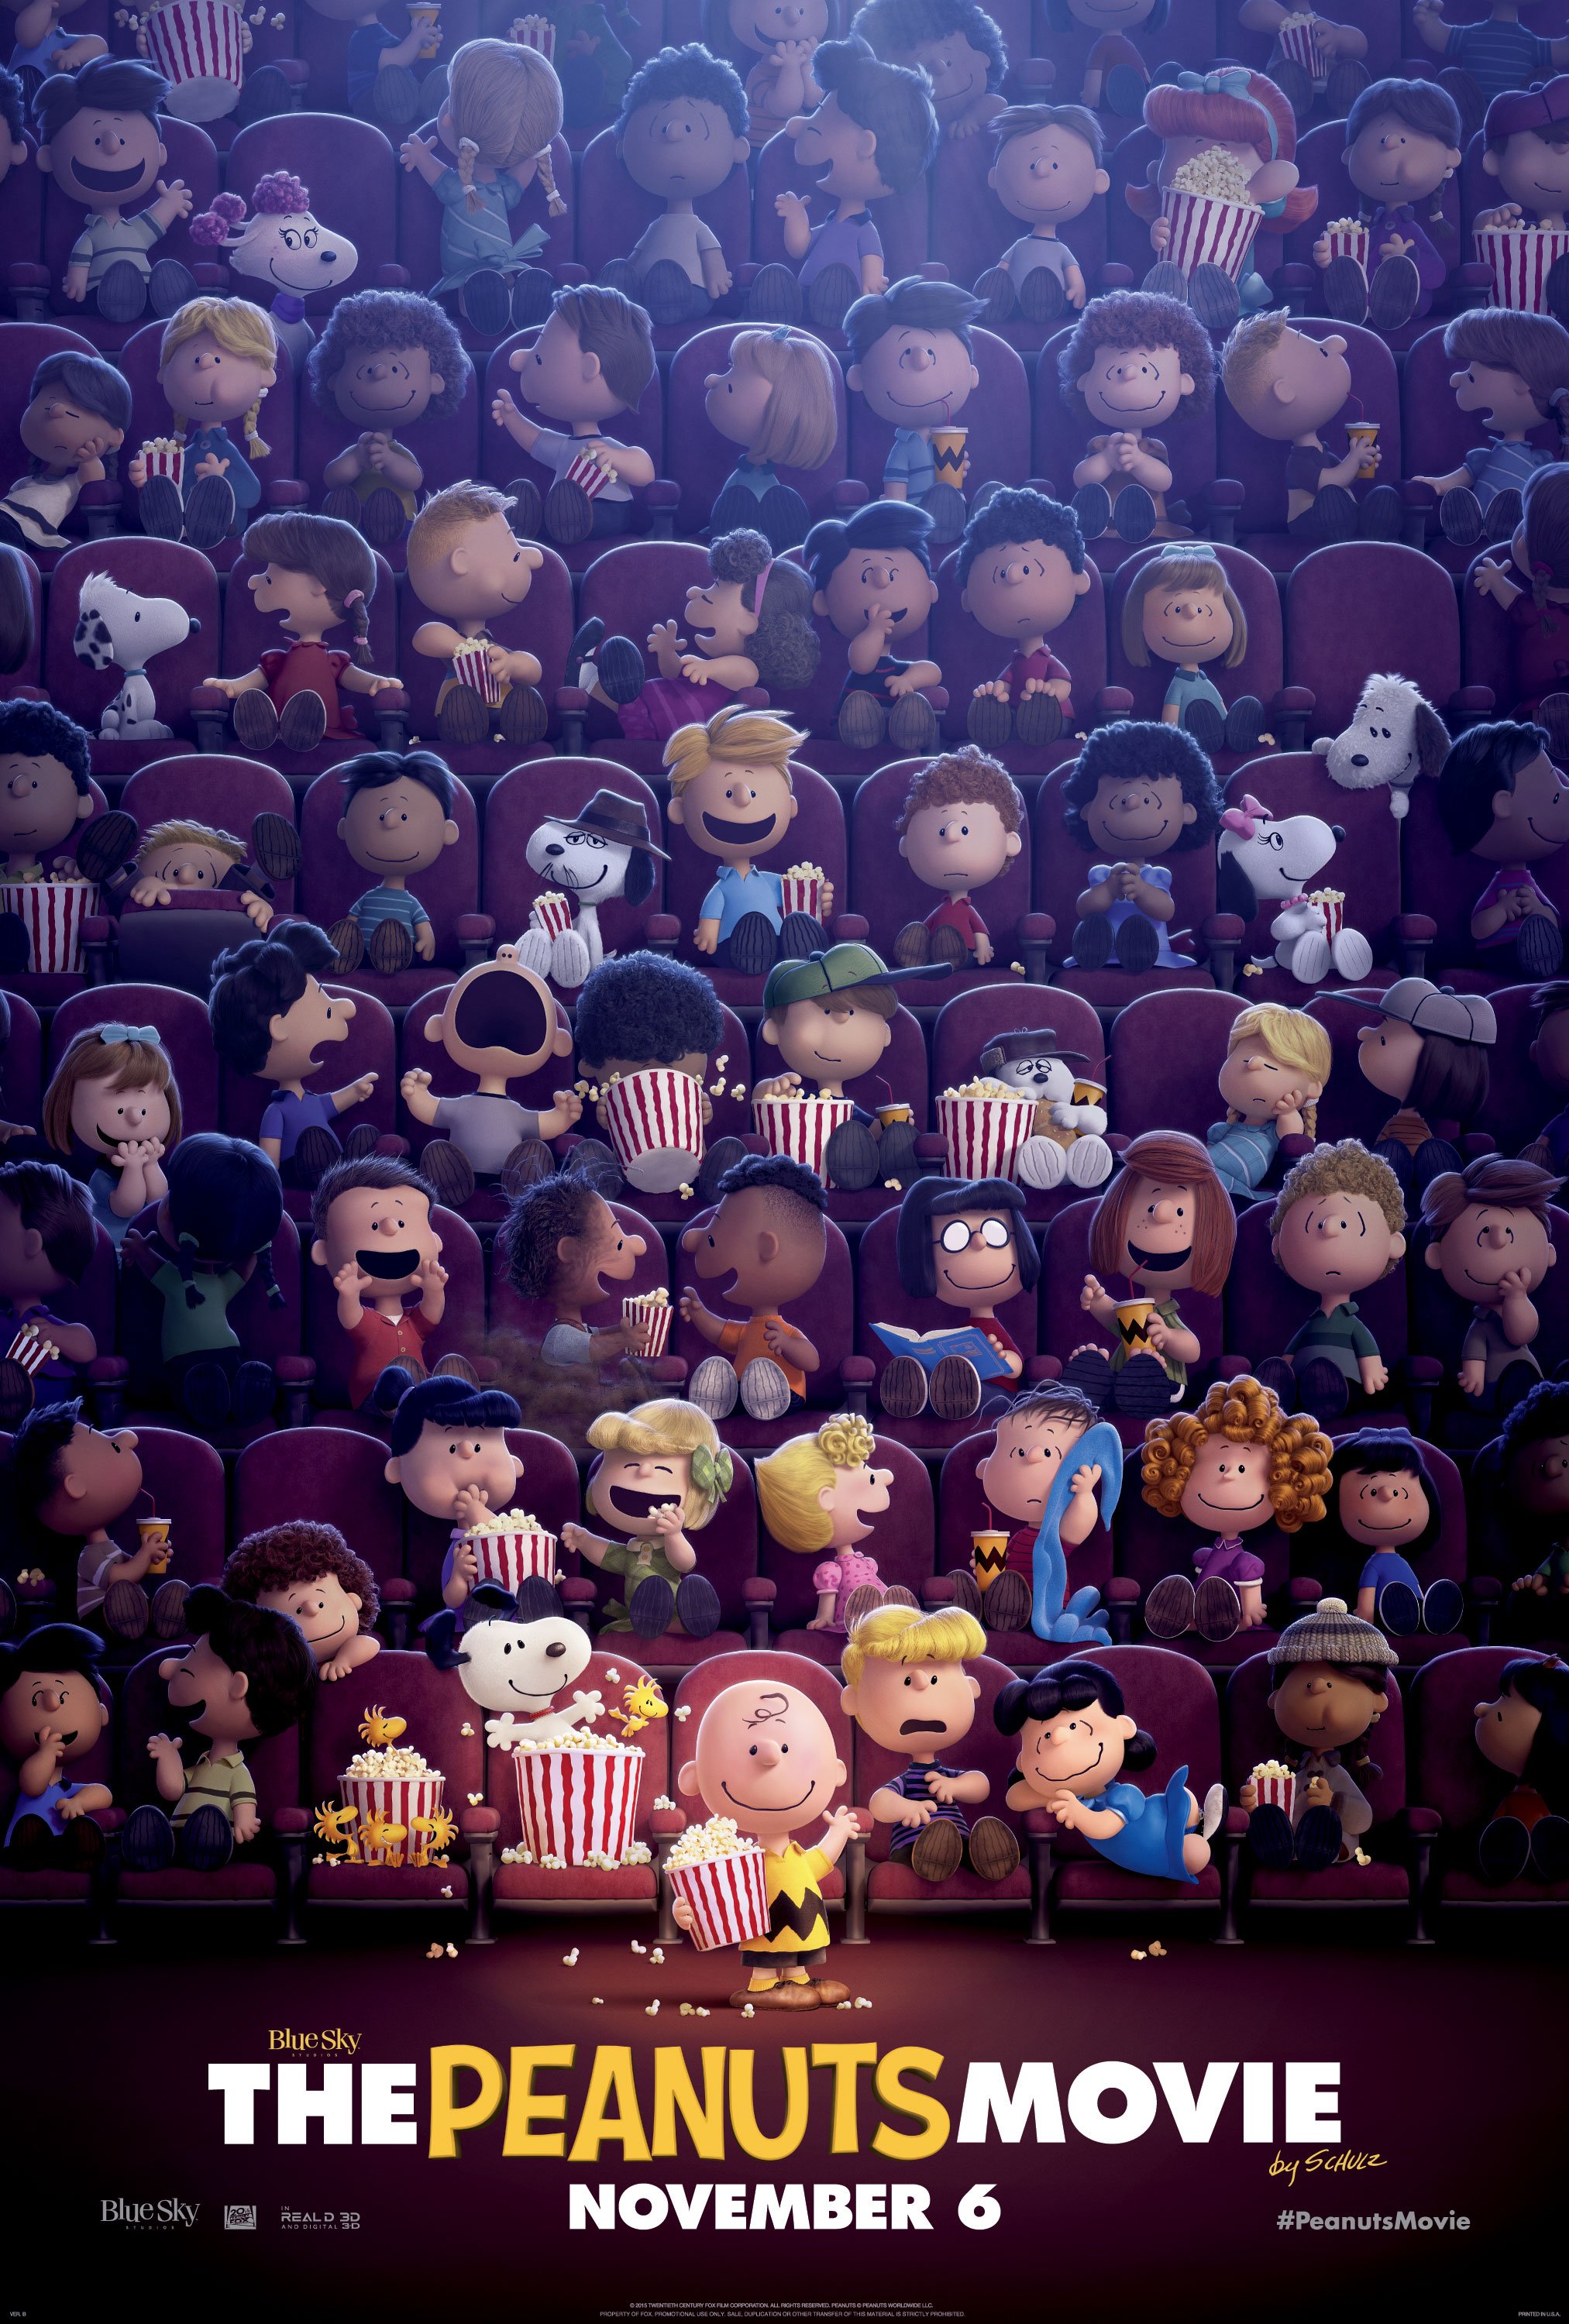 Poster of the movie Peanuts: Le film